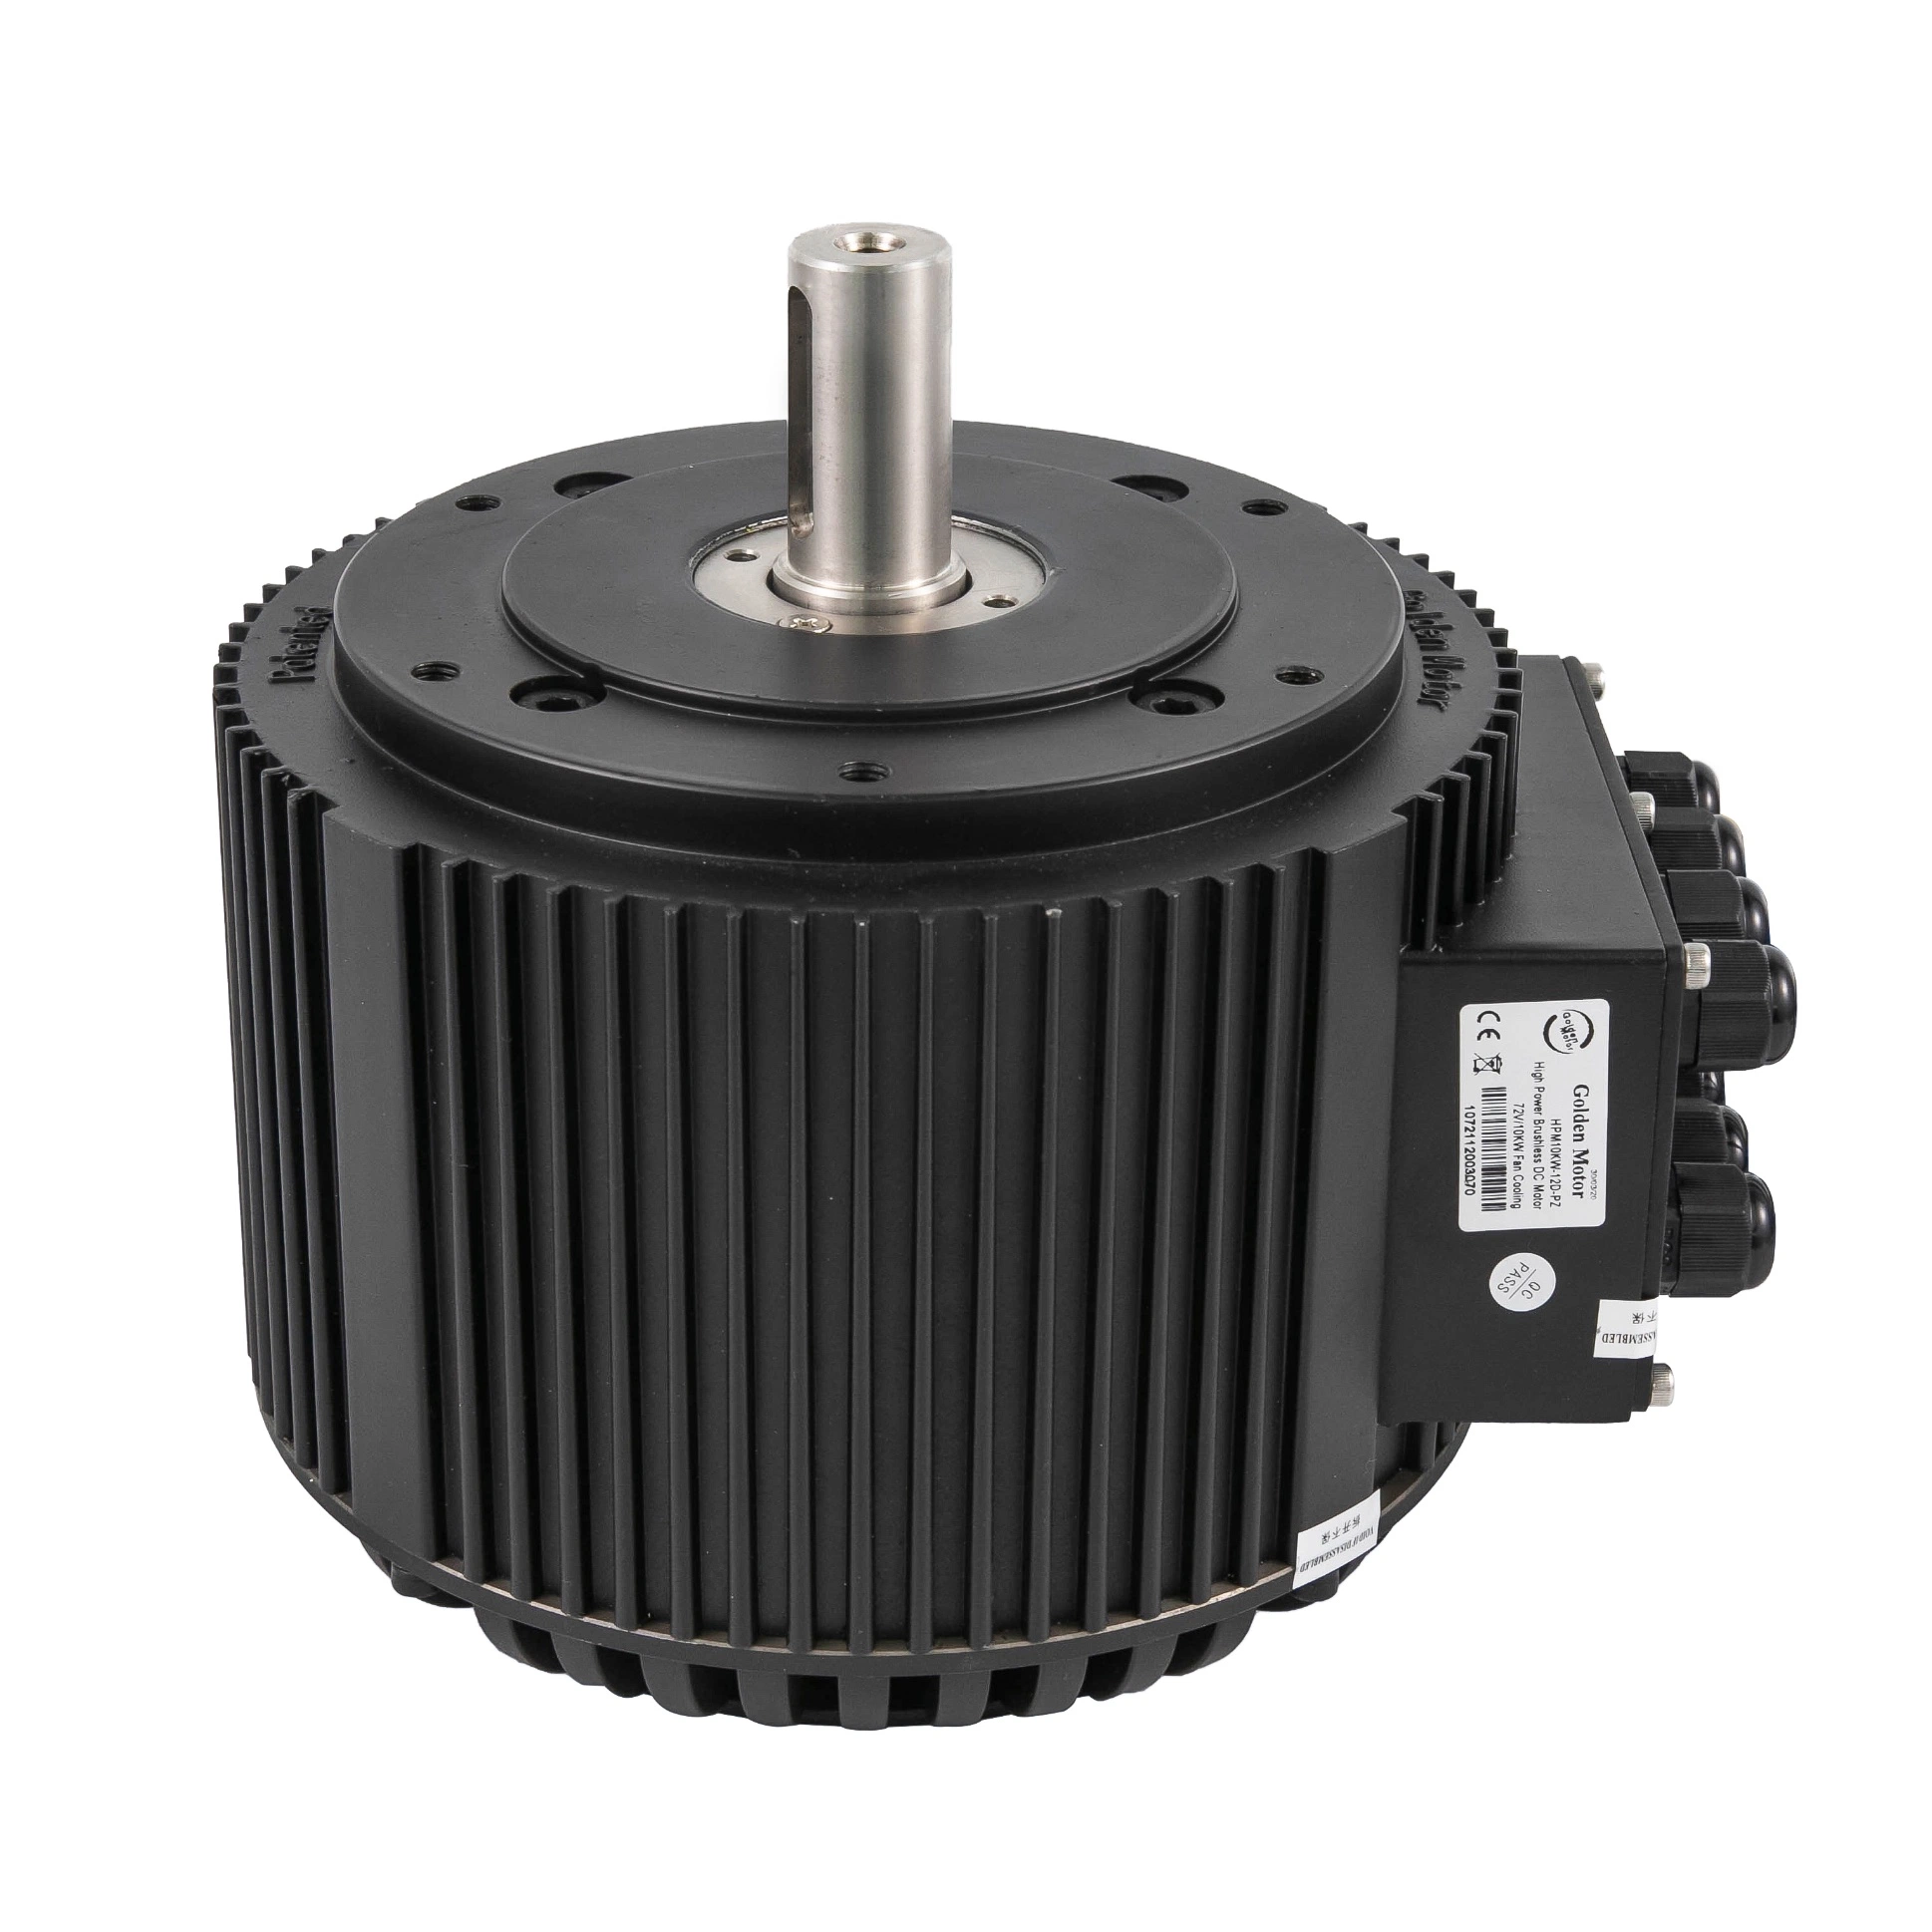 CE Approved High Power brushless DC BLDC motor 10kw up to 20kw 85 N.m 4000RPM Electric Motorcycle Motor  for car conversion kit